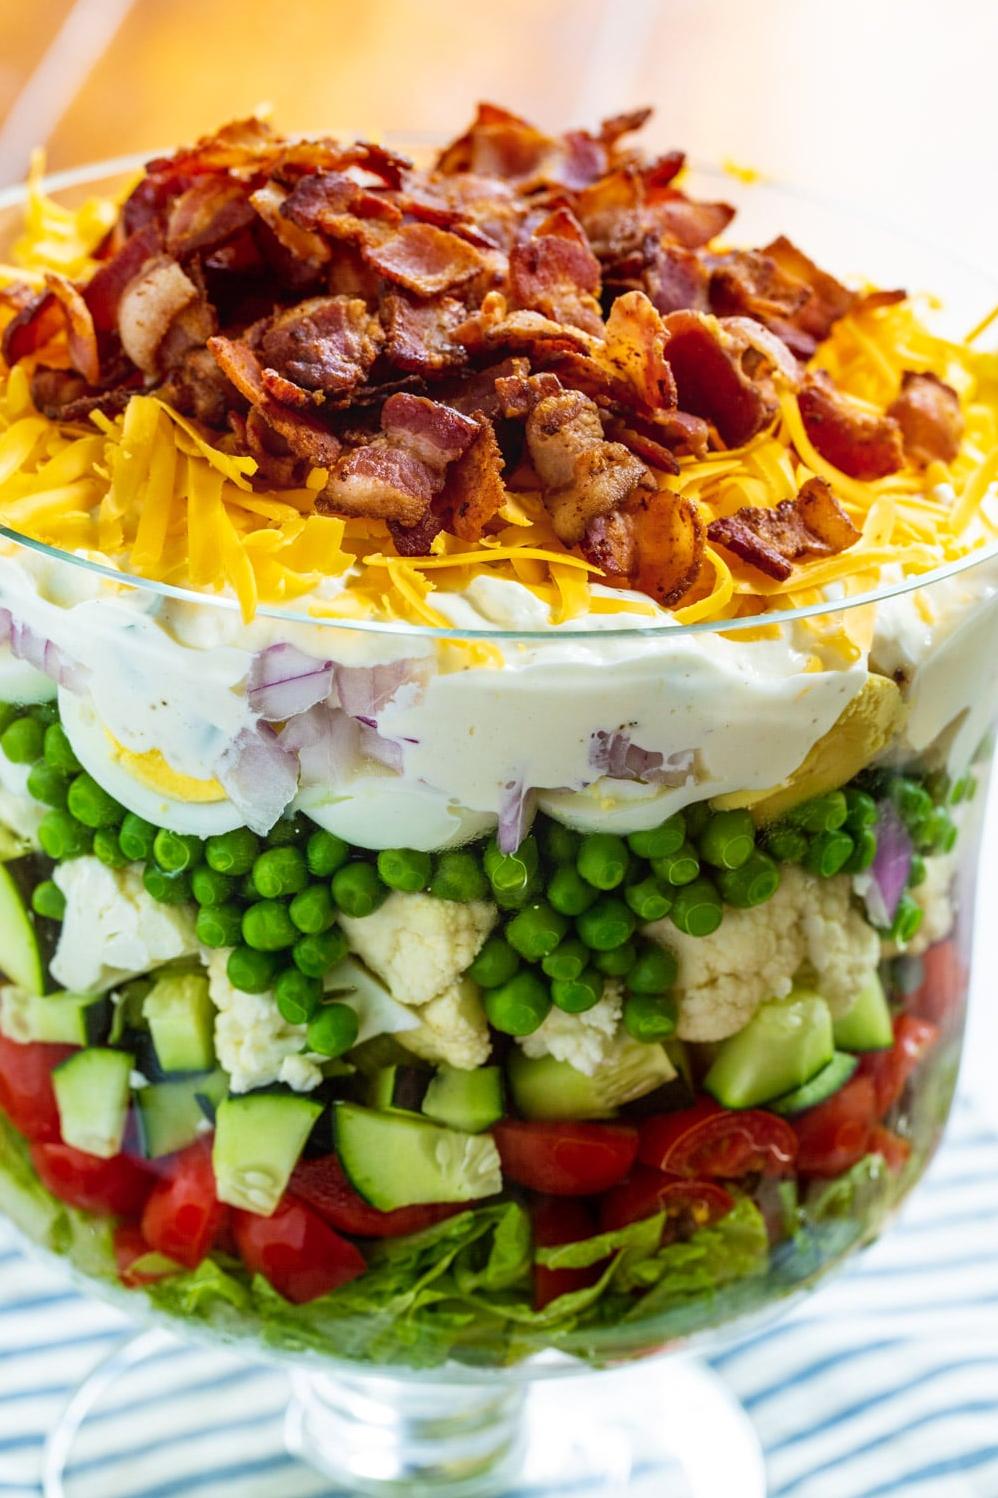  Dig into seven layers of pure crunch and flavor